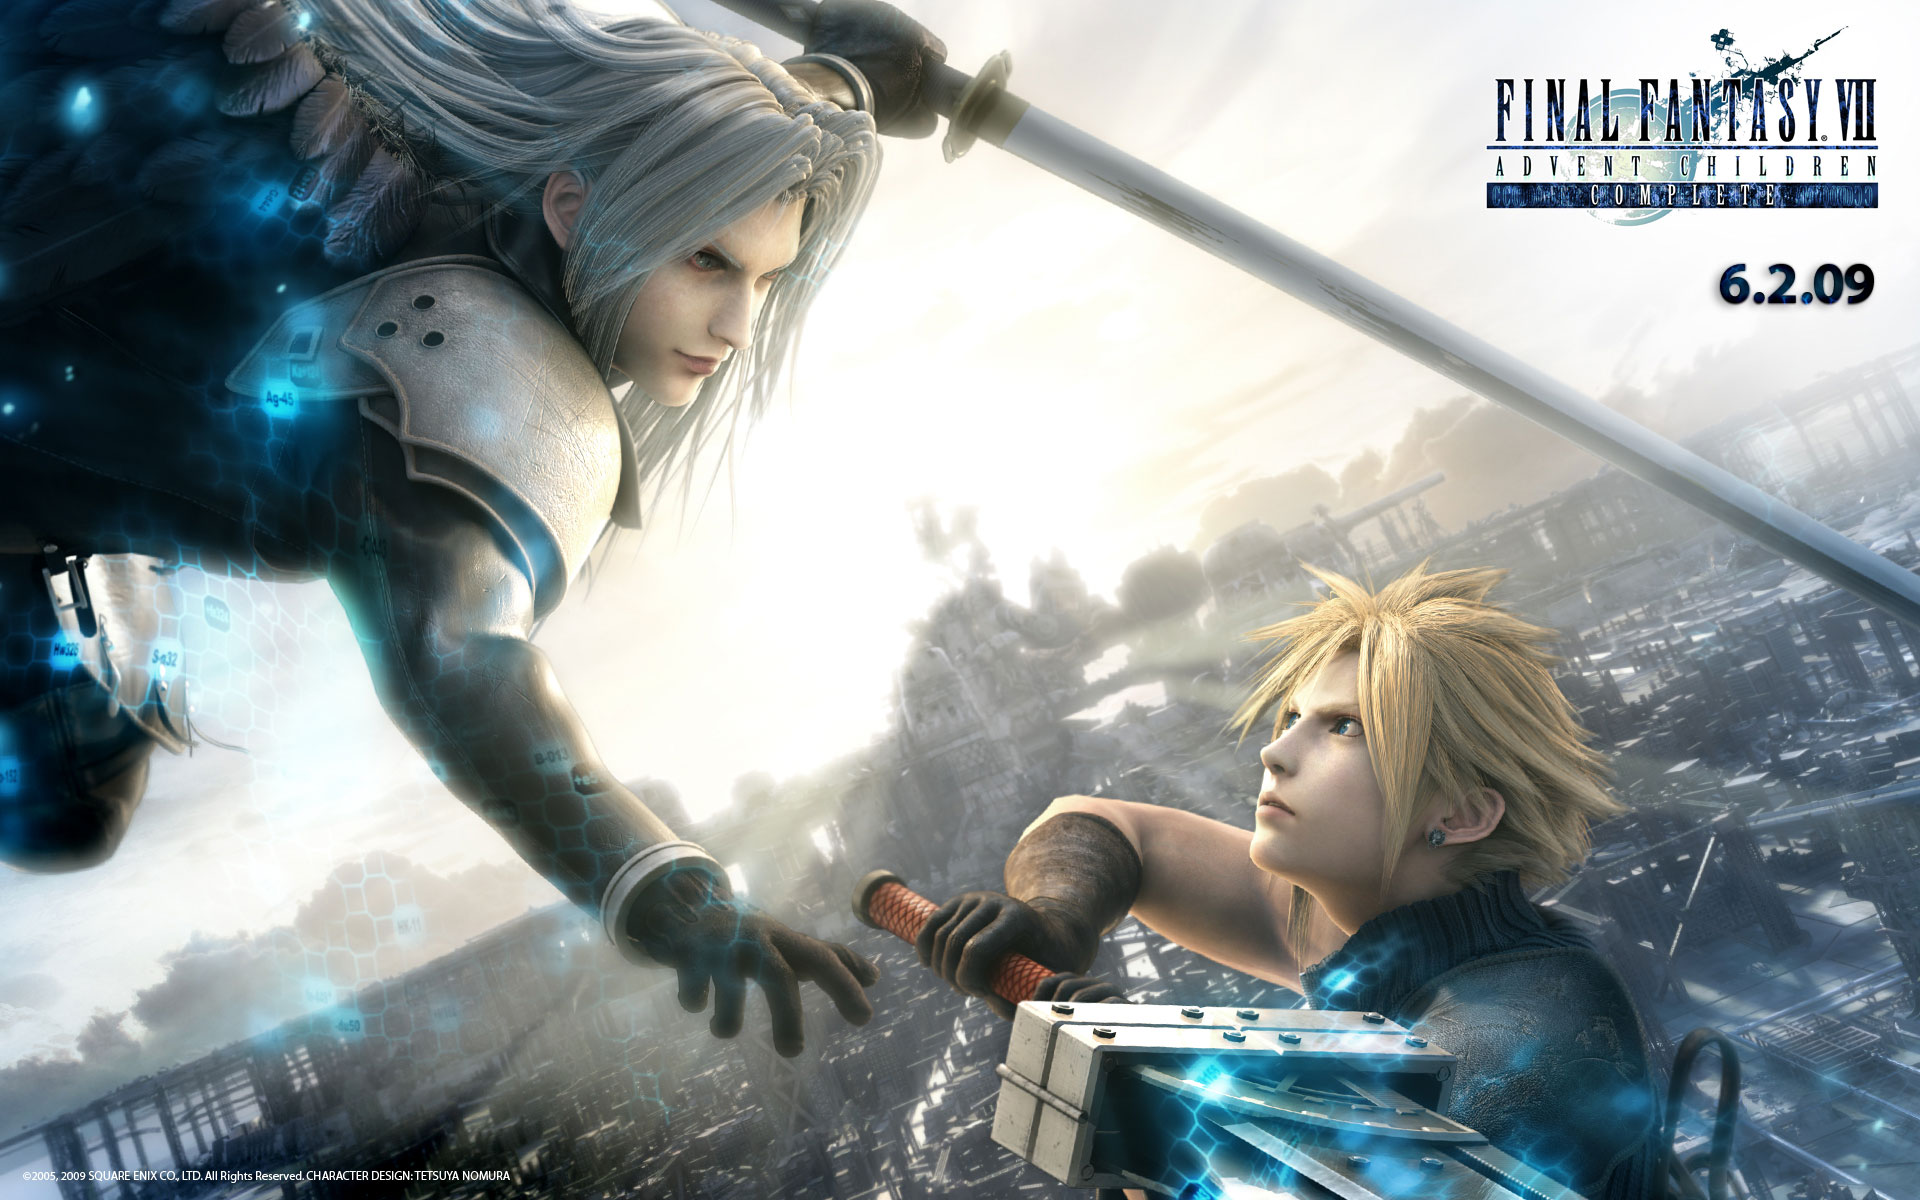 Cloud Strife  Final Fantasy VII  Image by ery00 2505223  Zerochan Anime  Image Board  Final fantasy cloud strife Final fantasy Final fantasy funny